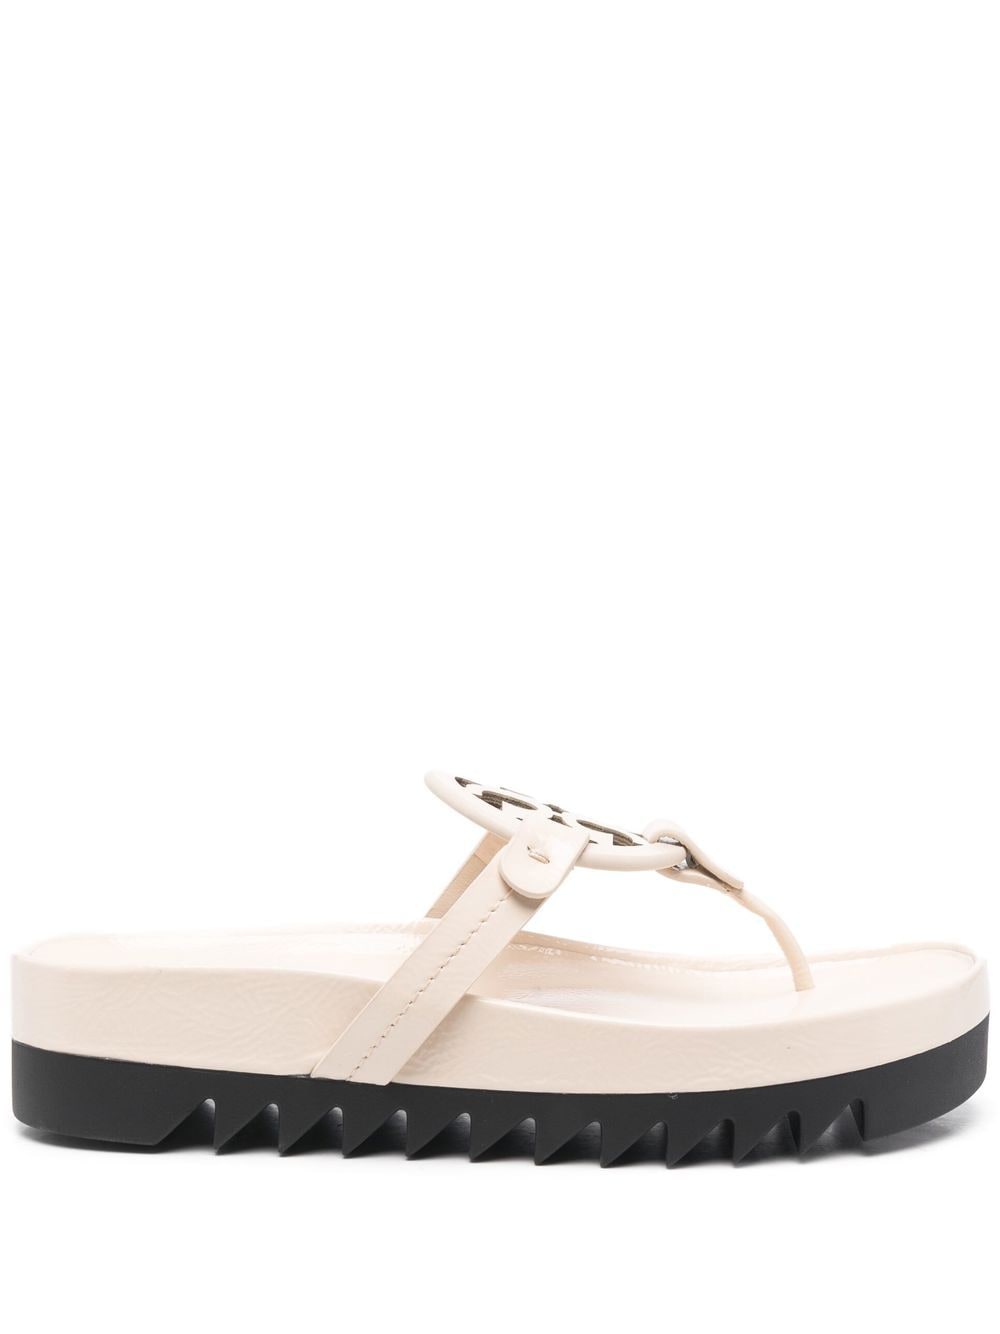 Tory Burch - logo-embellished thong sandals - women - Leather/Leather/Rubber - 6 - Neutrals